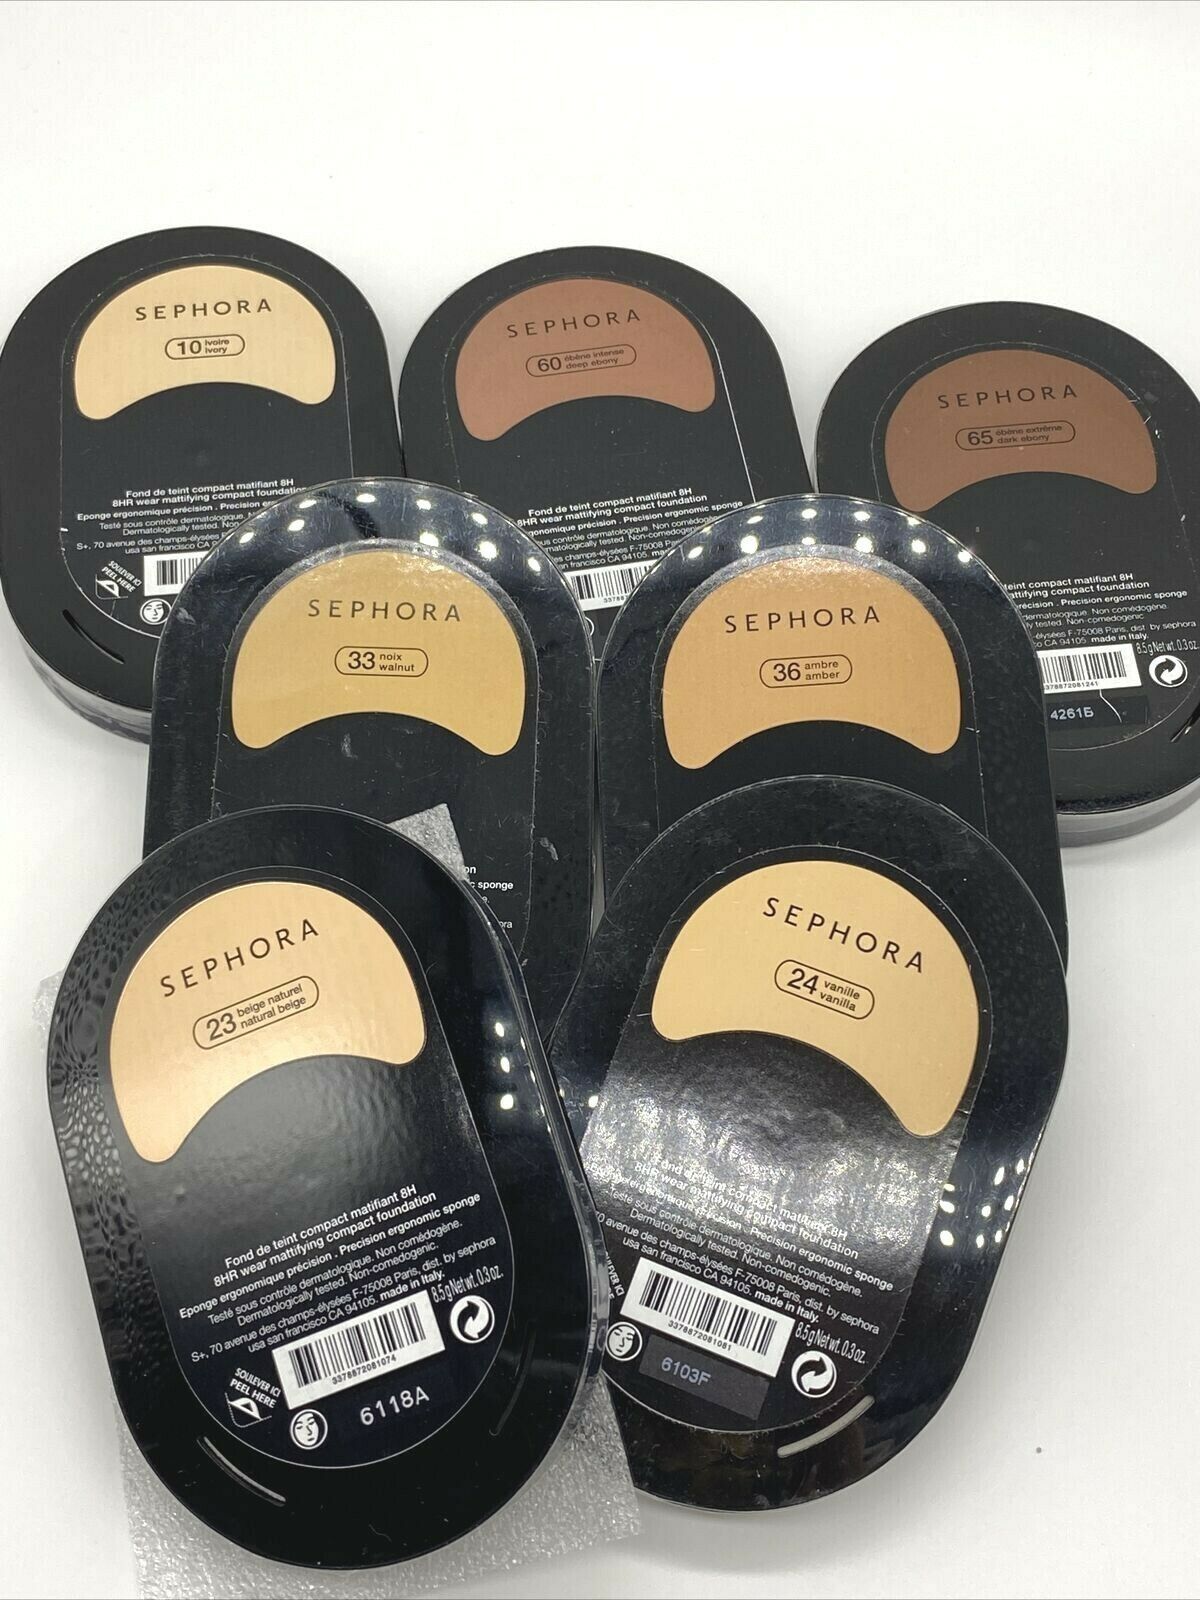 Sephora 8HR Wear Mattifying Compact Foundation ~Assorted Shades YOU PICK~ SEALED - $24.66 - $29.61